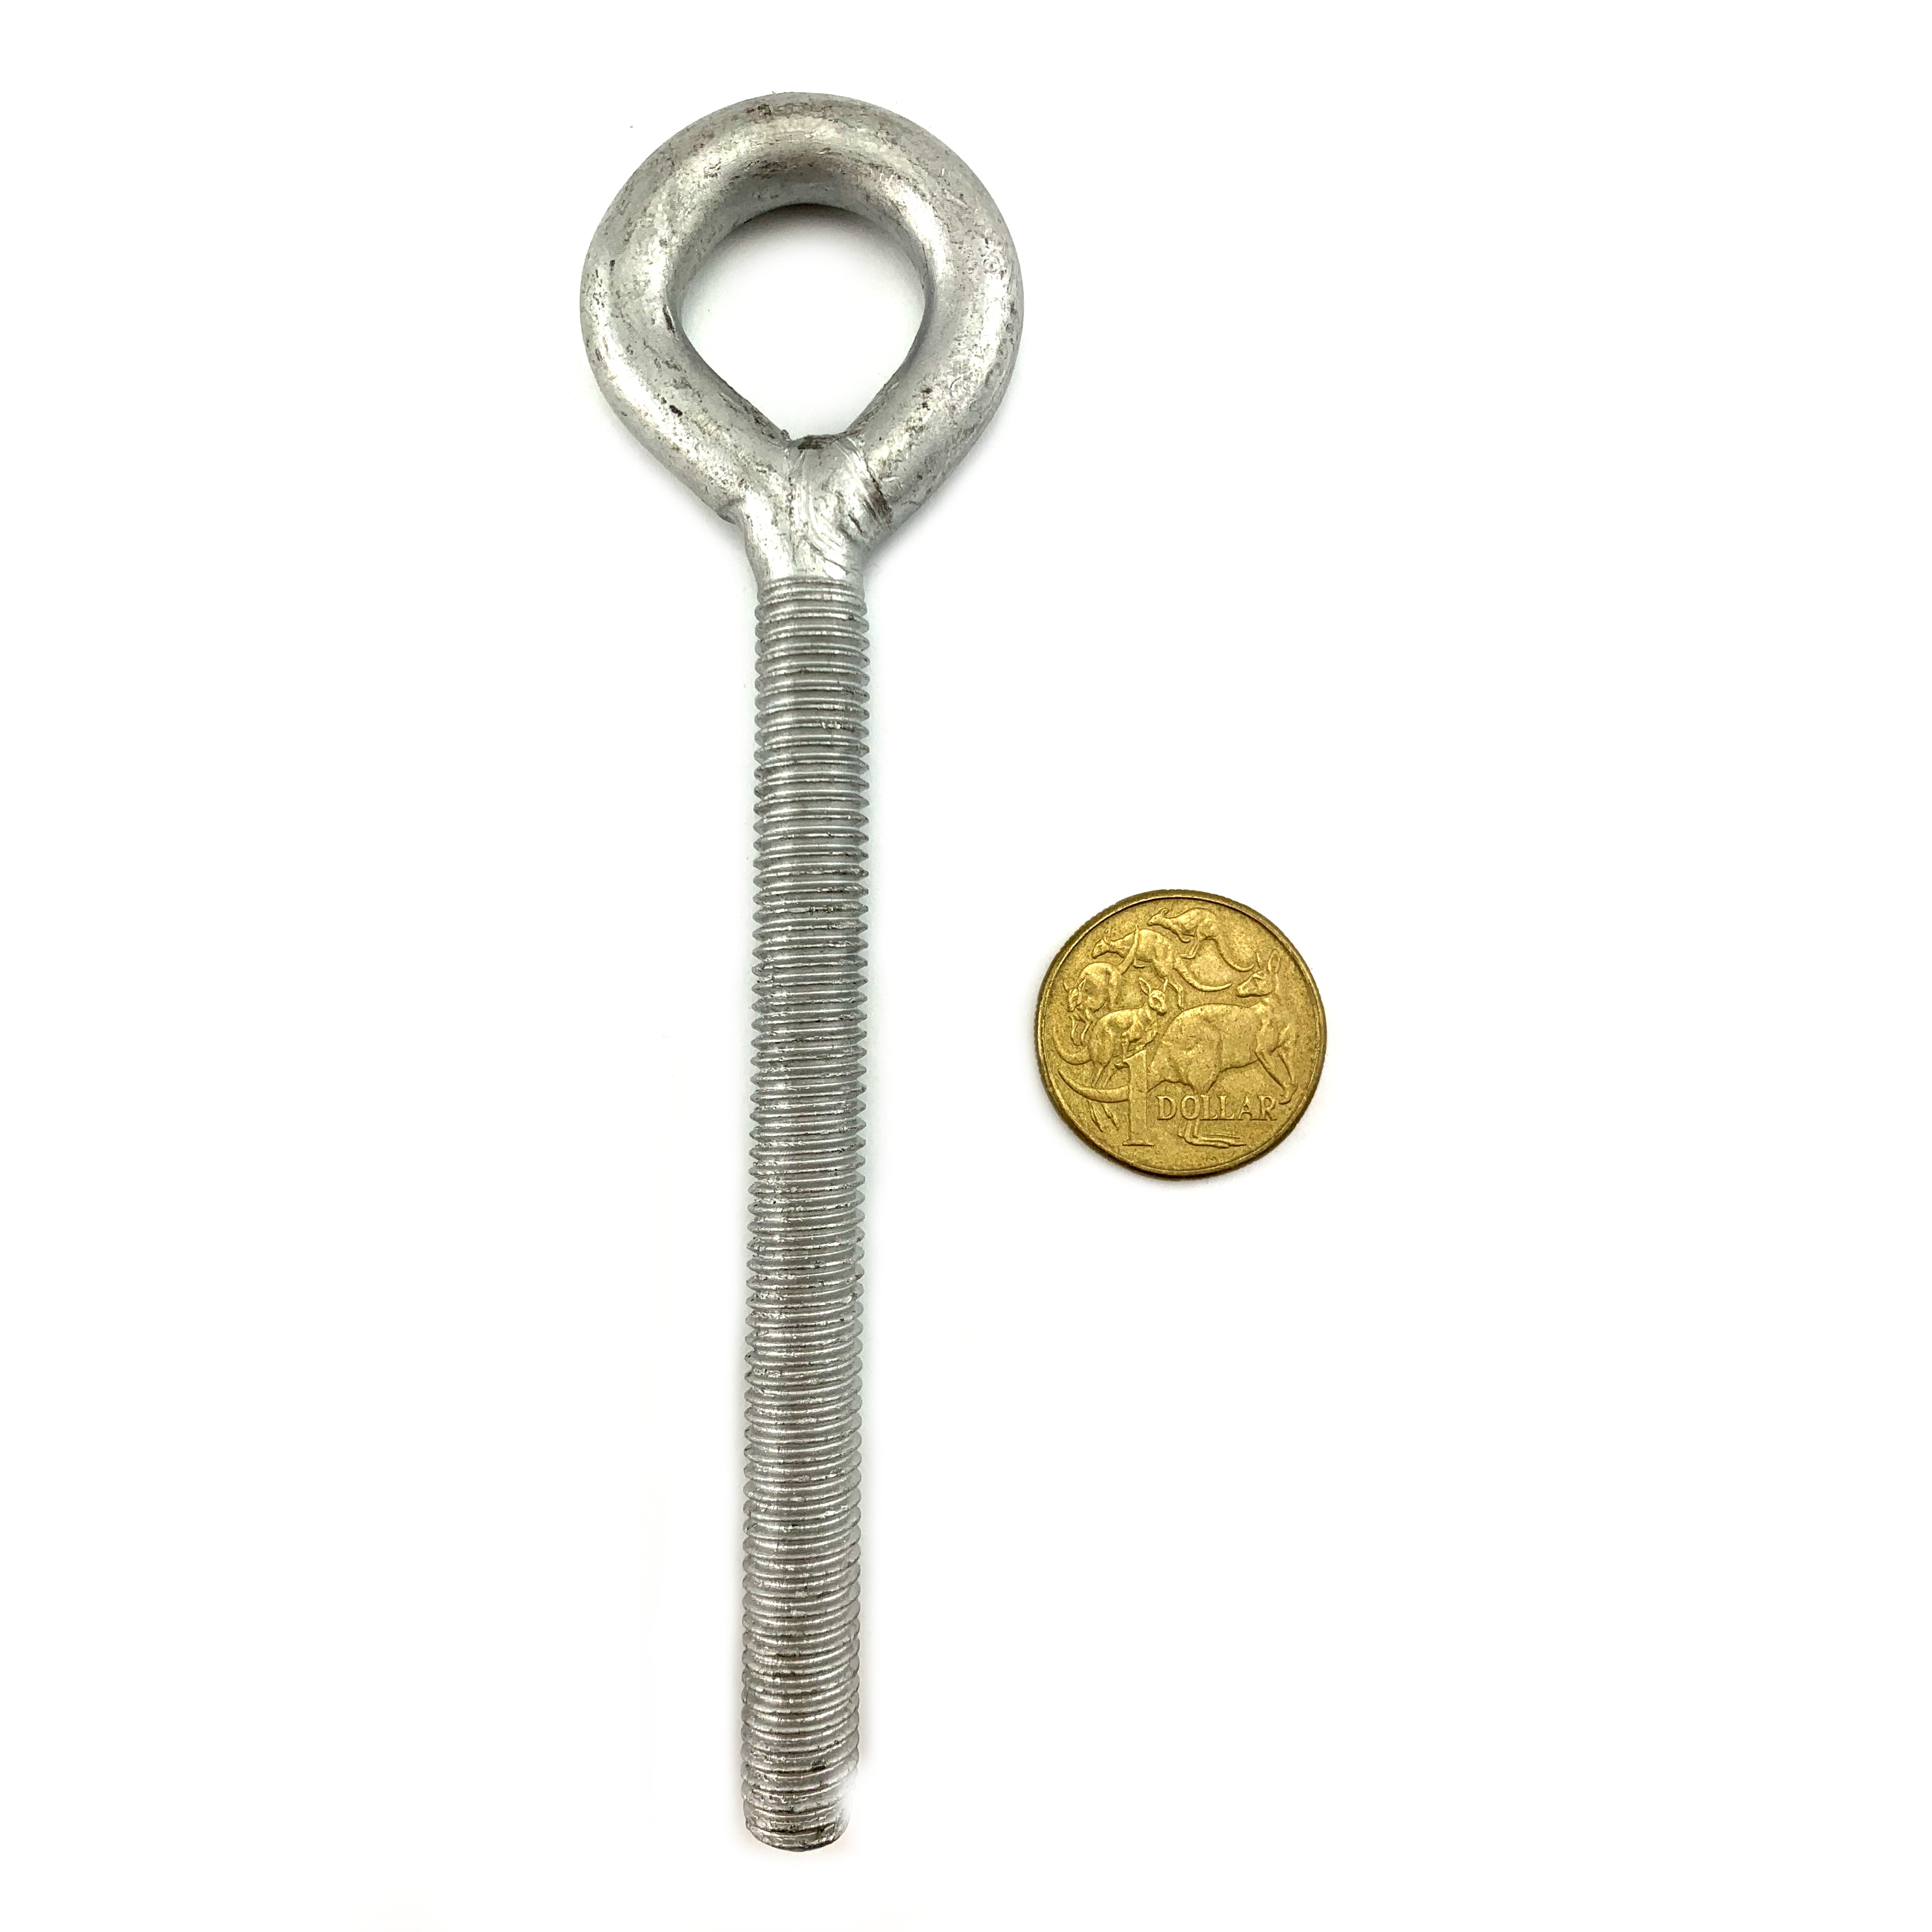 Galvanised eye bolt, size 10mm with a 100mm thread.